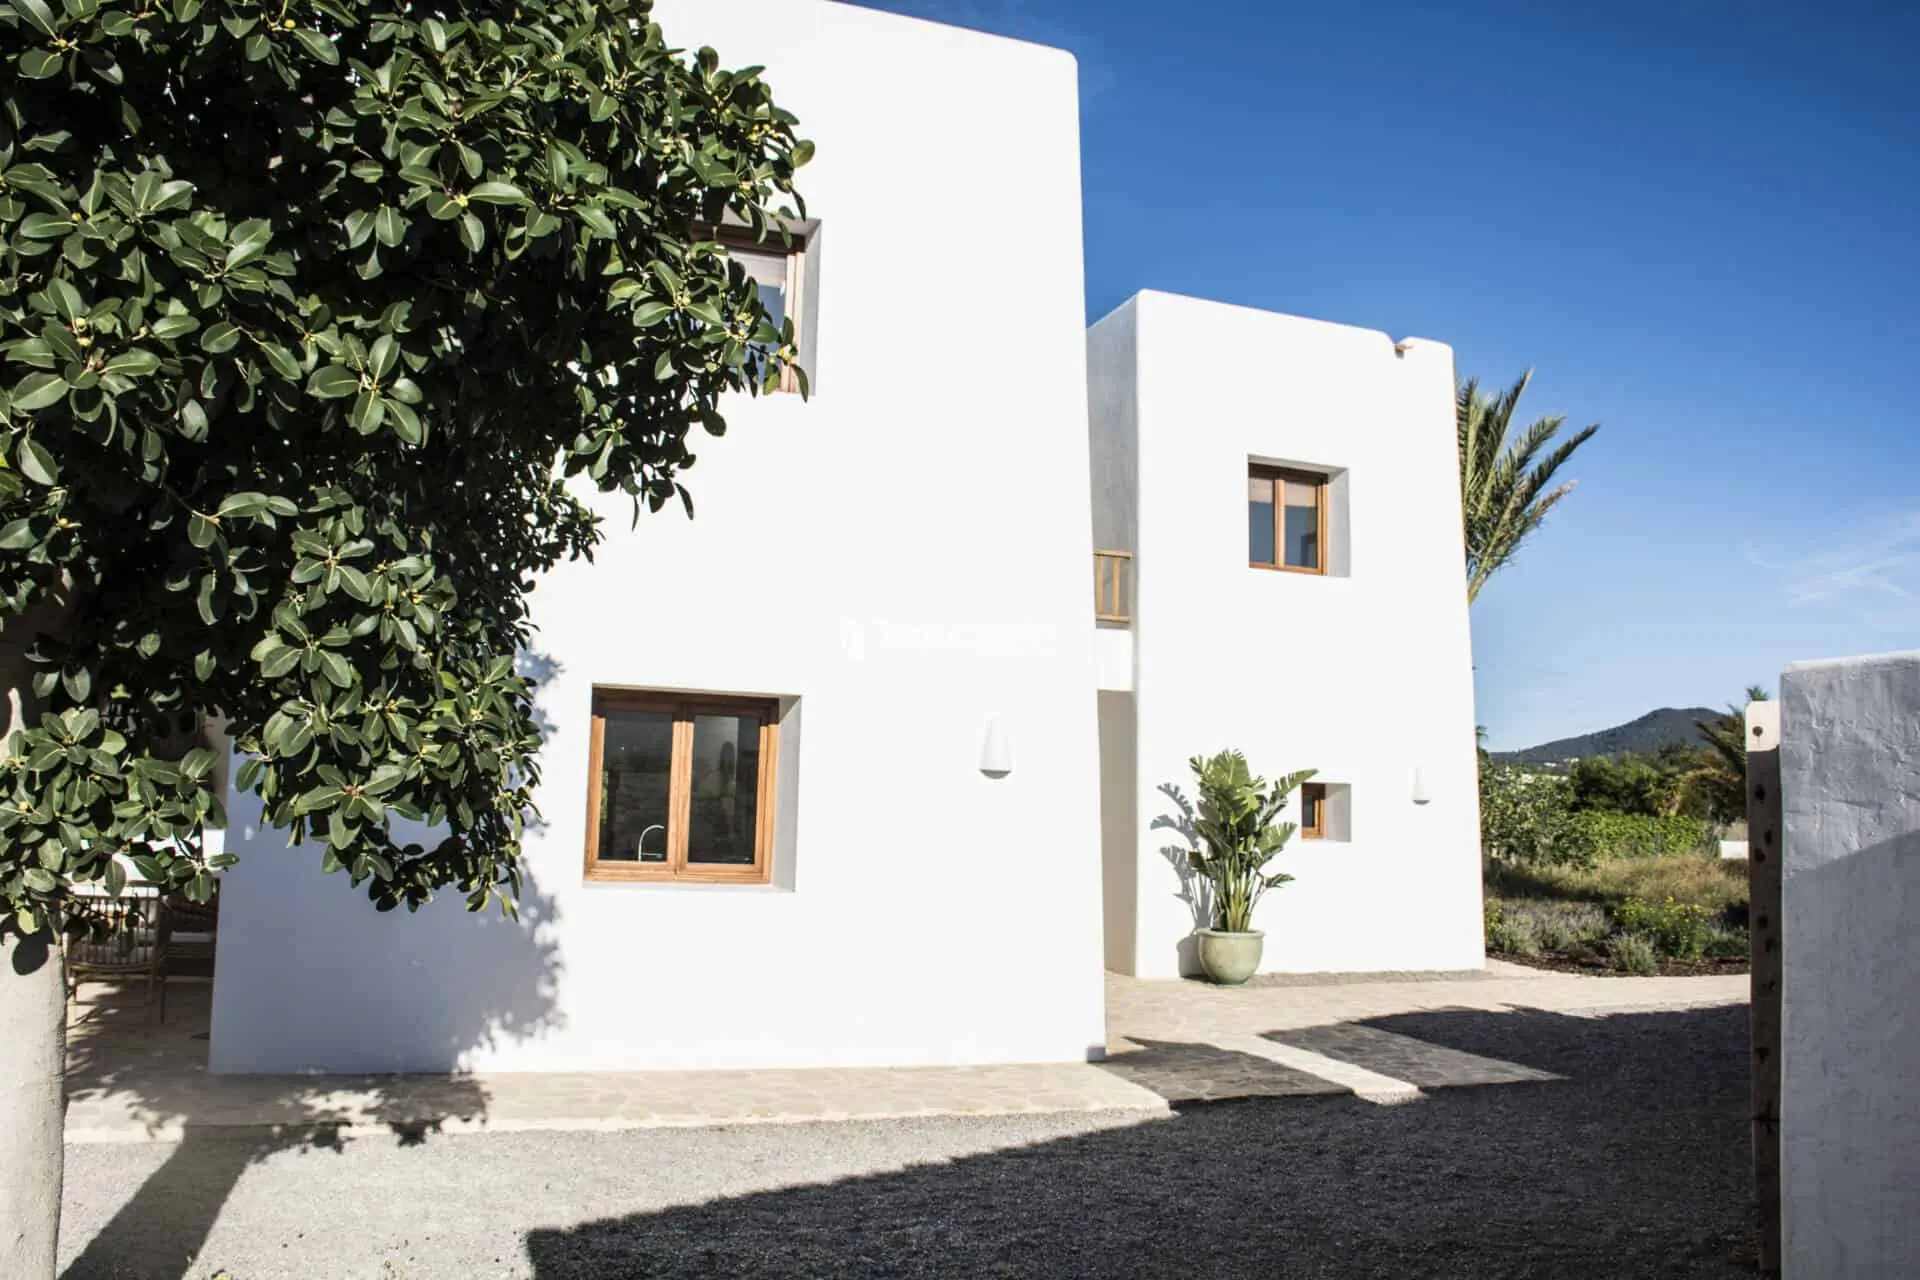 Authentic Ibiza style villa KM5 for 20 people groups